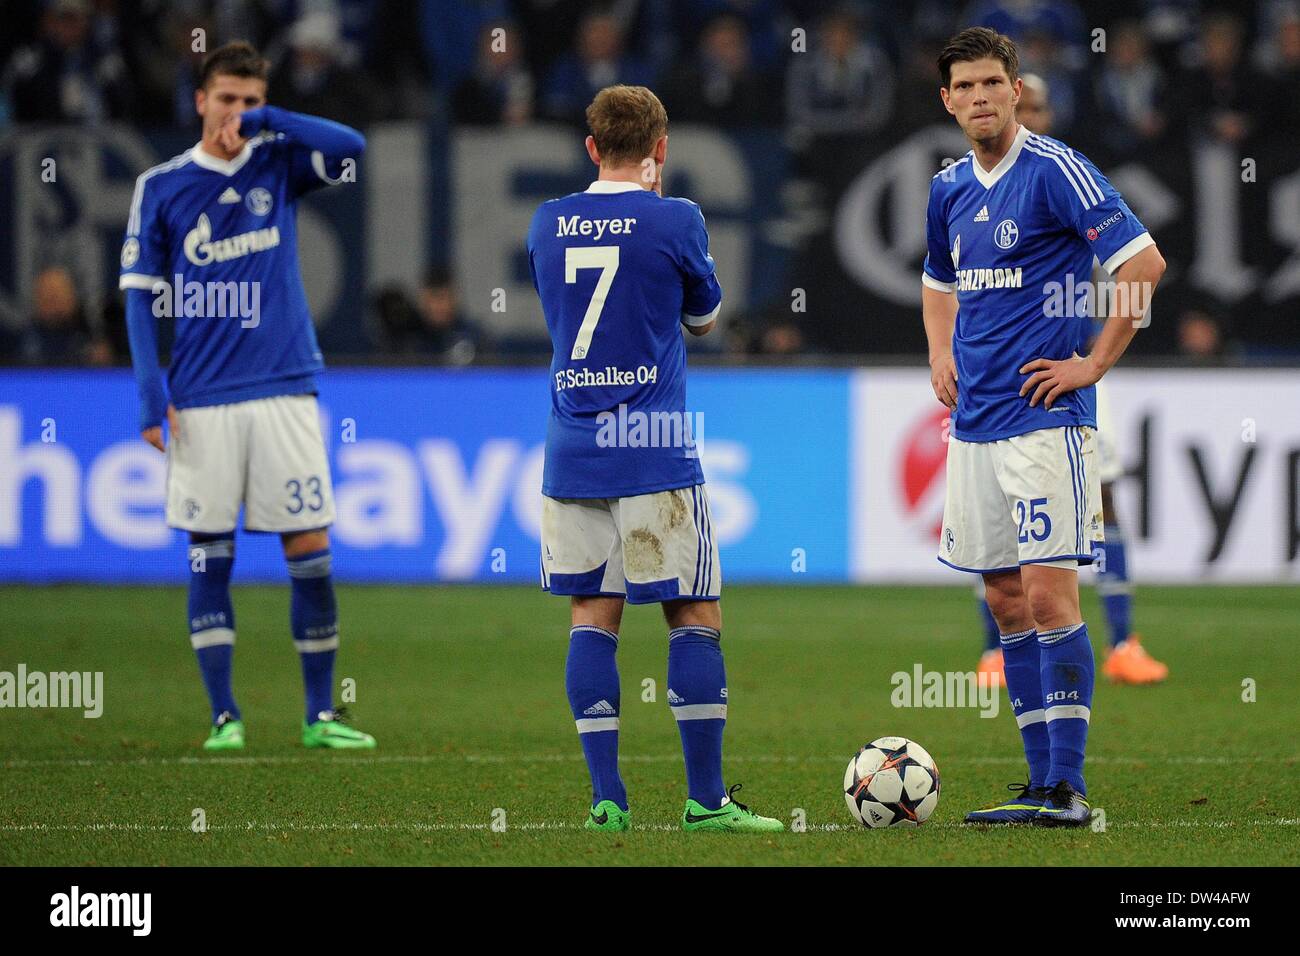 Gelsenkirchen, Germany. 26th Feb, 2014. Schalke's Max Meyer (L) and Klaas-Jan Huntelaar (R) react after the 0-6 goal during the Champions League round of sixteen match between FC Schalke 04 and Real Madrid at Stadium Gelsenkirchen in Gelsenkirchen, Germany, 26 February 2014. Photo: Marius Becker/dpa/Alamy Live News Stock Photo